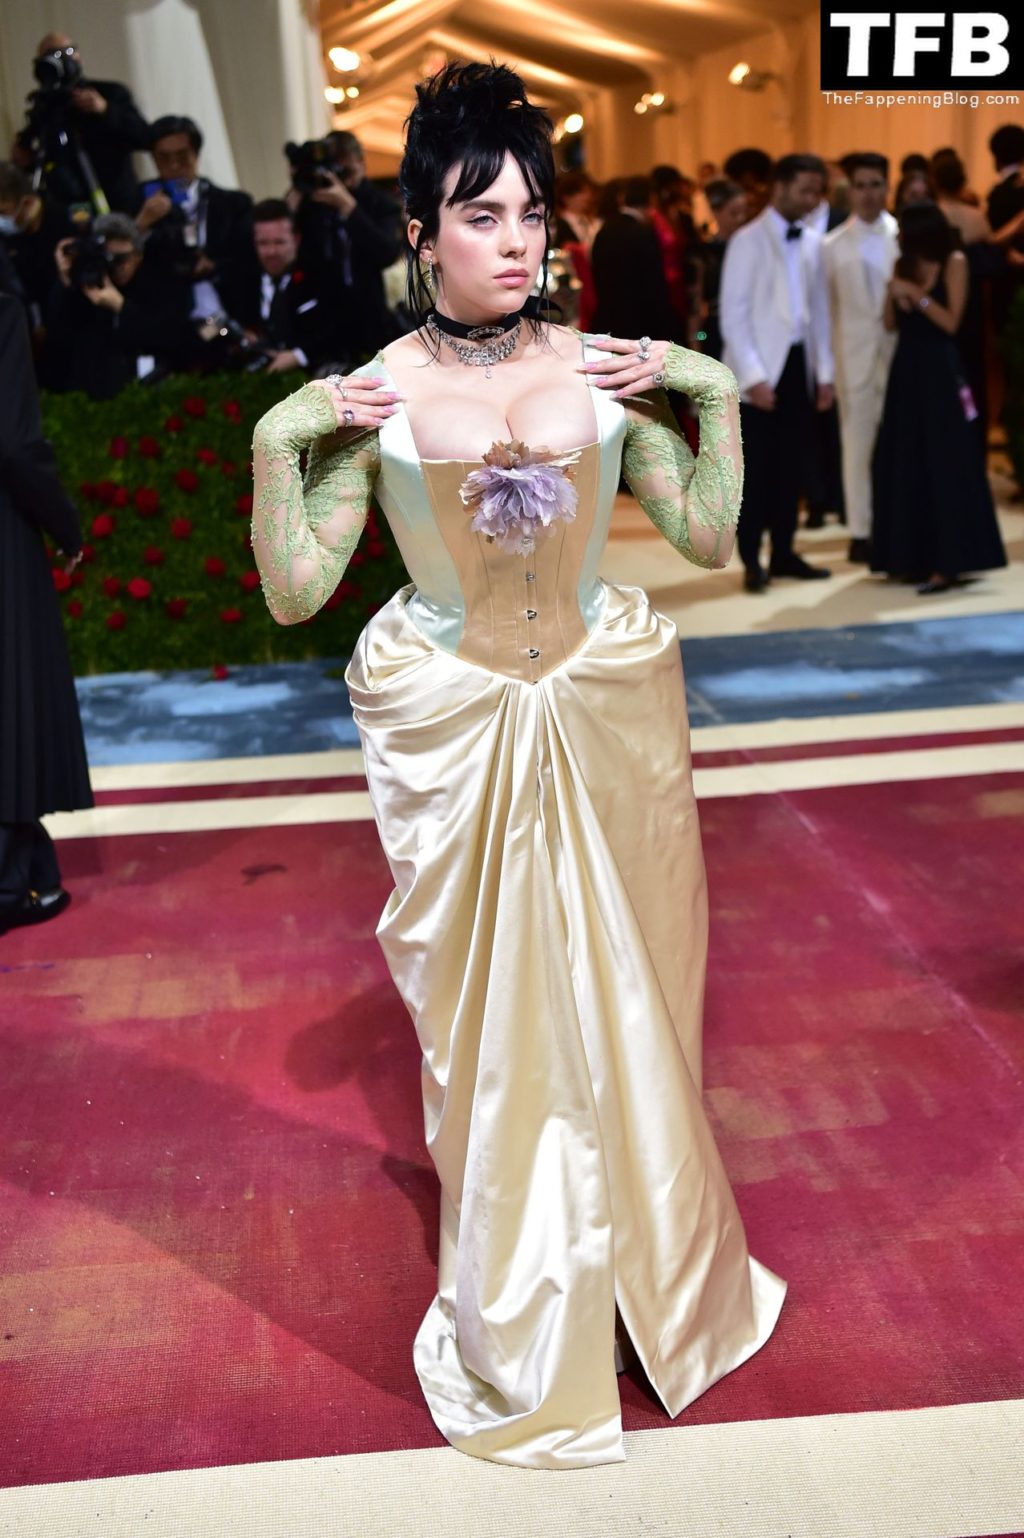 Billie Eilish Sexy The Fappening Blog 138 1024x1538 - Billie Eilish Showcases Nice Cleavage at The 2022 Met Gala in NYC (155 Photos)